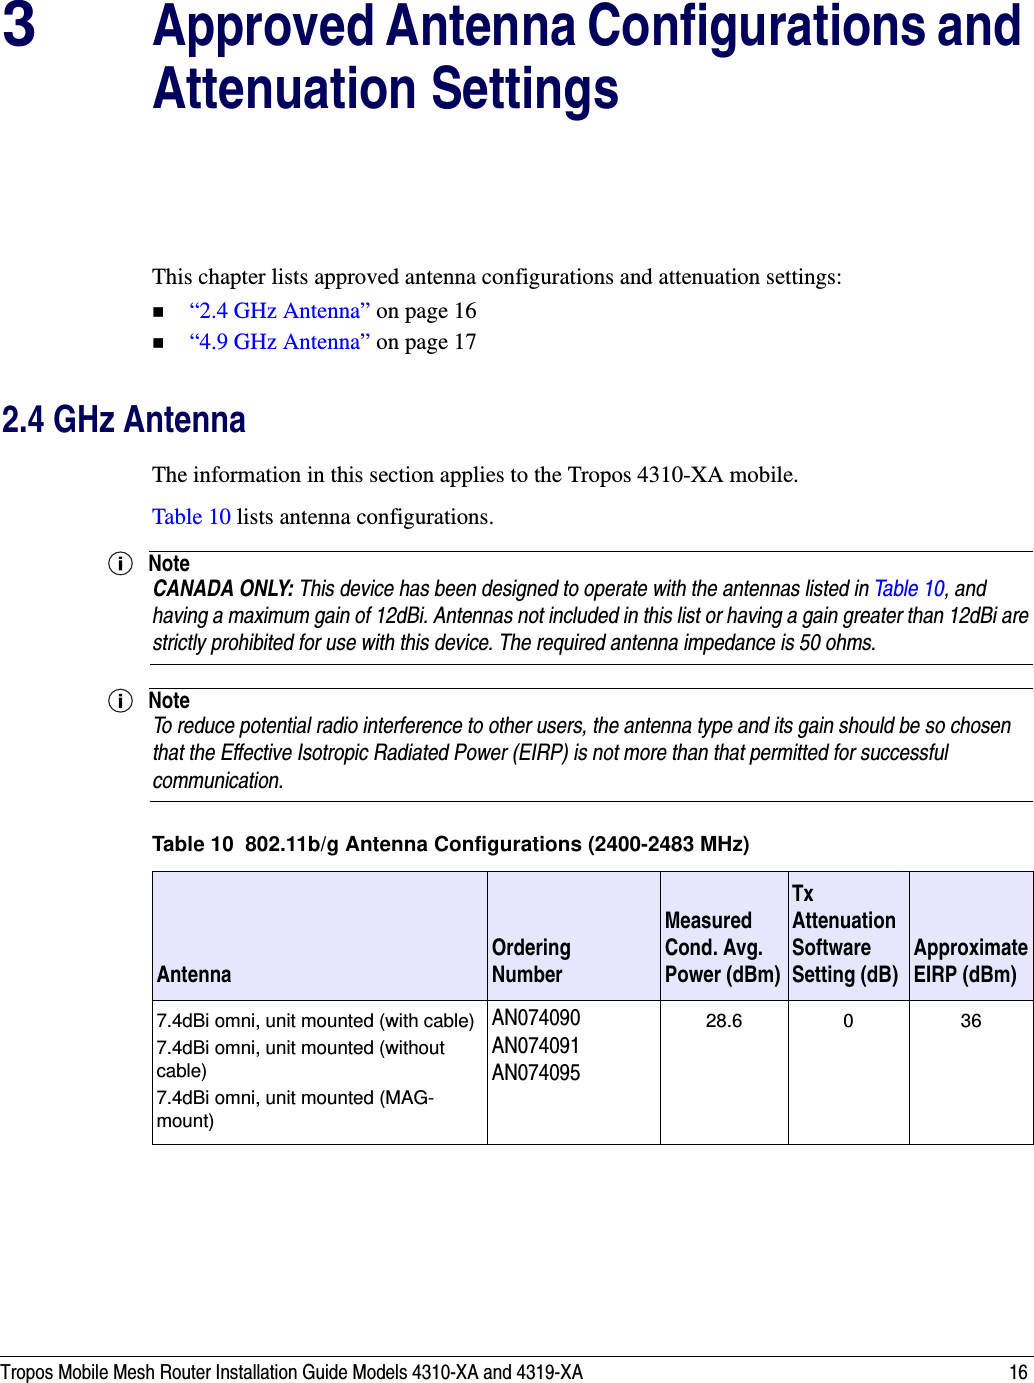 Tropos Mobile Mesh Router Installation Guide Models 4310-XA and 4319-XA 163Approved Antenna Configurations and Attenuation SettingsThis chapter lists approved antenna configurations and attenuation settings:“2.4 GHz Antenna” on page 16 “4.9 GHz Antenna” on page 172.4 GHz AntennaThe information in this section applies to the Tropos 4310-XA mobile.Table 10 lists antenna configurations.NoteCANADA ONLY: This device has been designed to operate with the antennas listed in Table 10, and having a maximum gain of 12dBi. Antennas not included in this list or having a gain greater than 12dBi are strictly prohibited for use with this device. The required antenna impedance is 50 ohms.NoteTo reduce potential radio interference to other users, the antenna type and its gain should be so chosen that the Effective Isotropic Radiated Power (EIRP) is not more than that permitted for successful communication.Table 10  802.11b/g Antenna Configurations (2400-2483 MHz)Antenna Ordering NumberMeasured Cond. Avg. Power (dBm)Tx Attenuation Software Setting (dB) Approximate EIRP (dBm)7.4dBi omni, unit mounted (with cable)7.4dBi omni, unit mounted (without cable)7.4dBi omni, unit mounted (MAG-mount)AN074090AN074091AN07409528.6 0 36